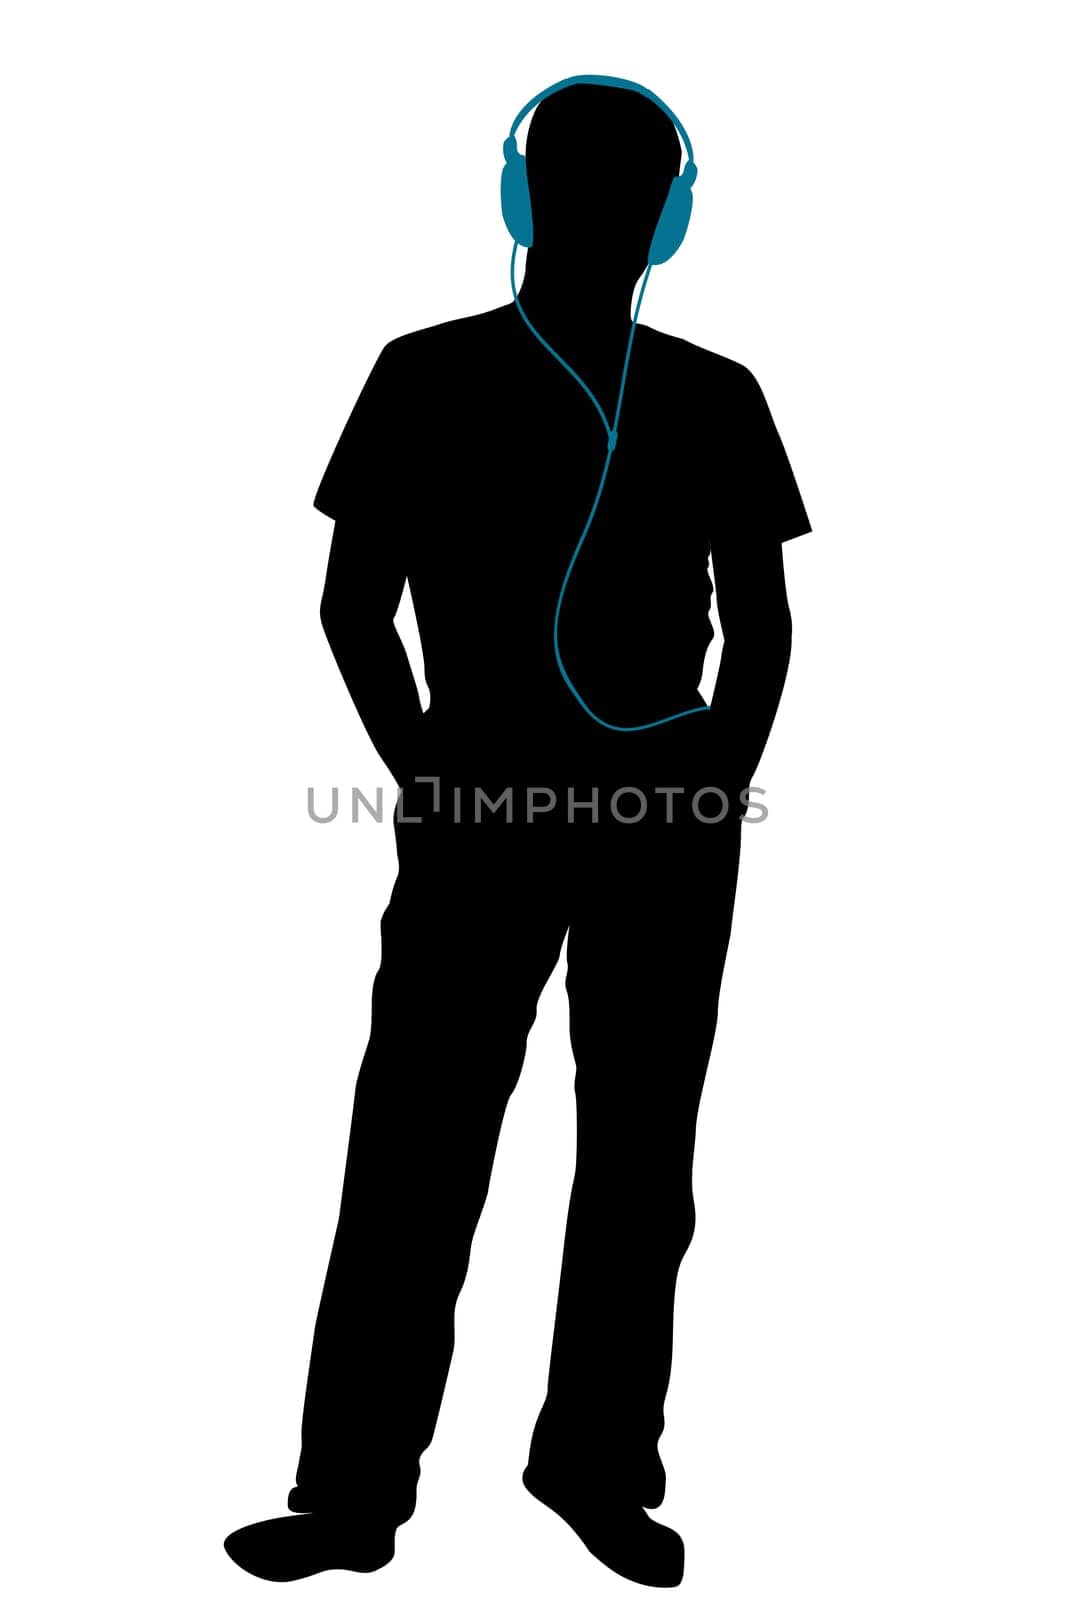 Silhouette of a man listening to music with headphones by hibrida13